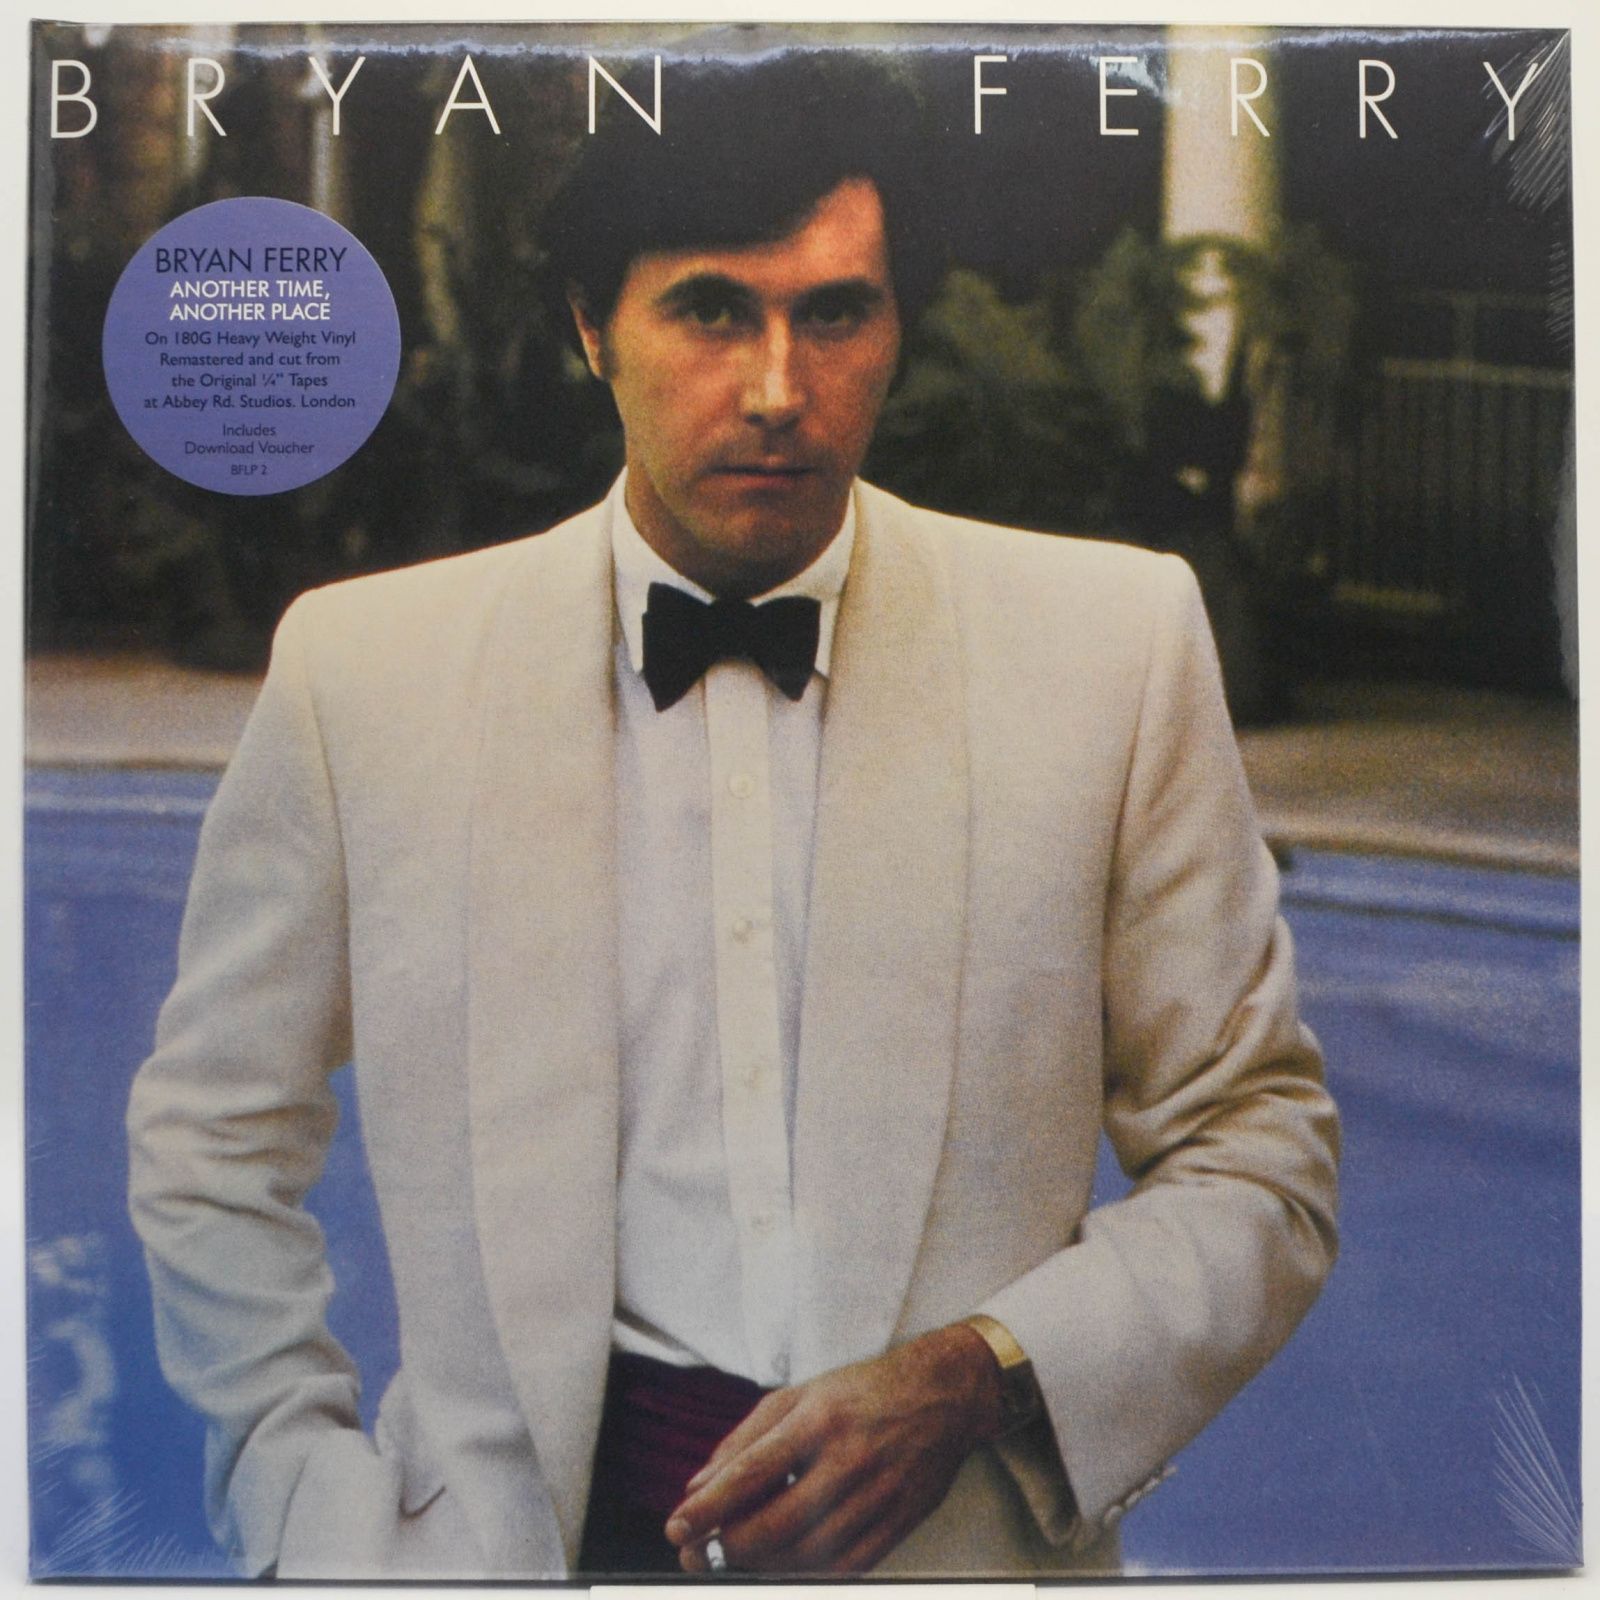 Bryan Ferry — Another Time, Another Place, 1974